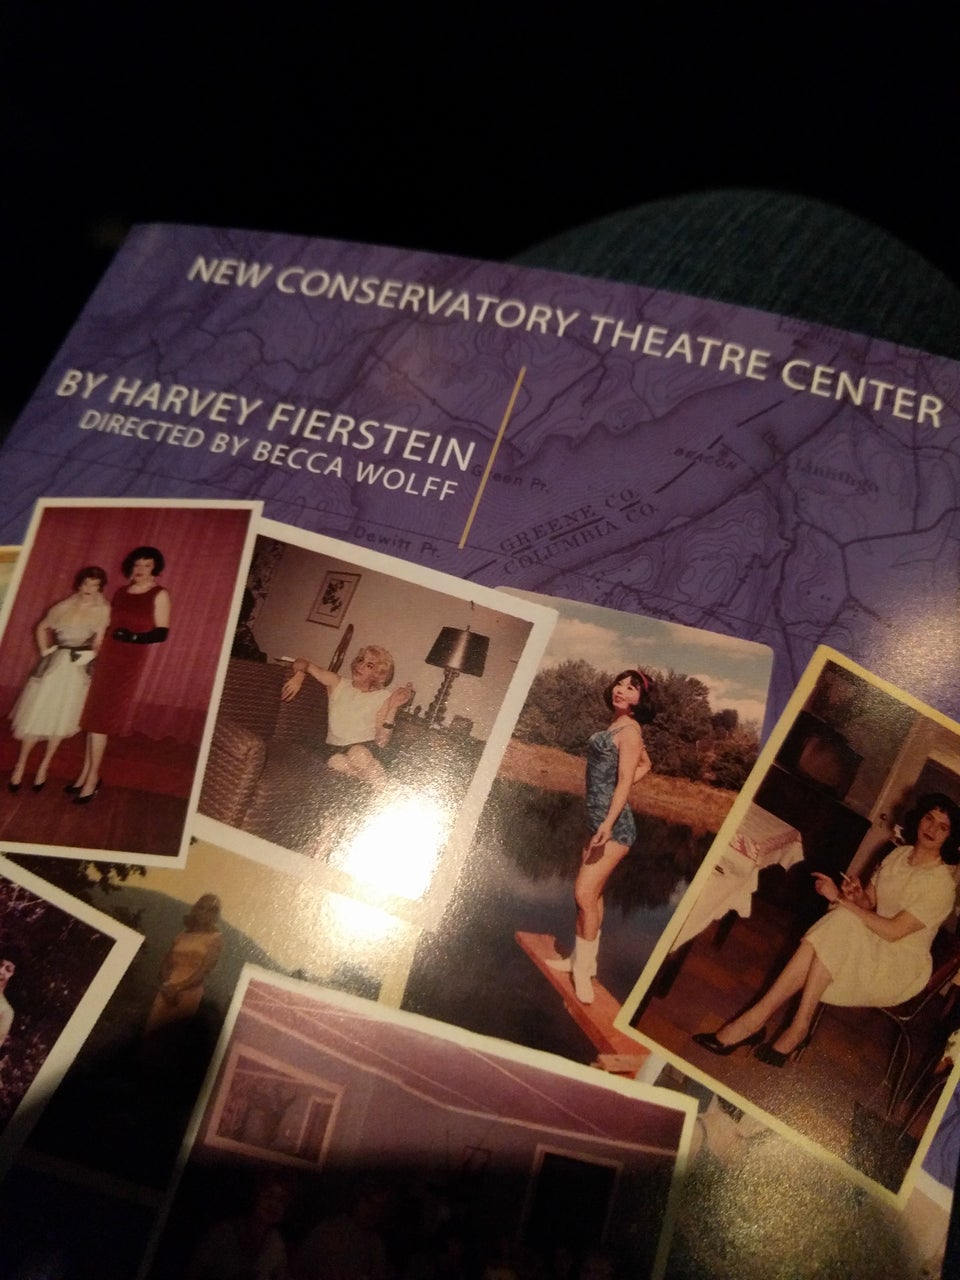 Photo of New Conservatory Theatre Center